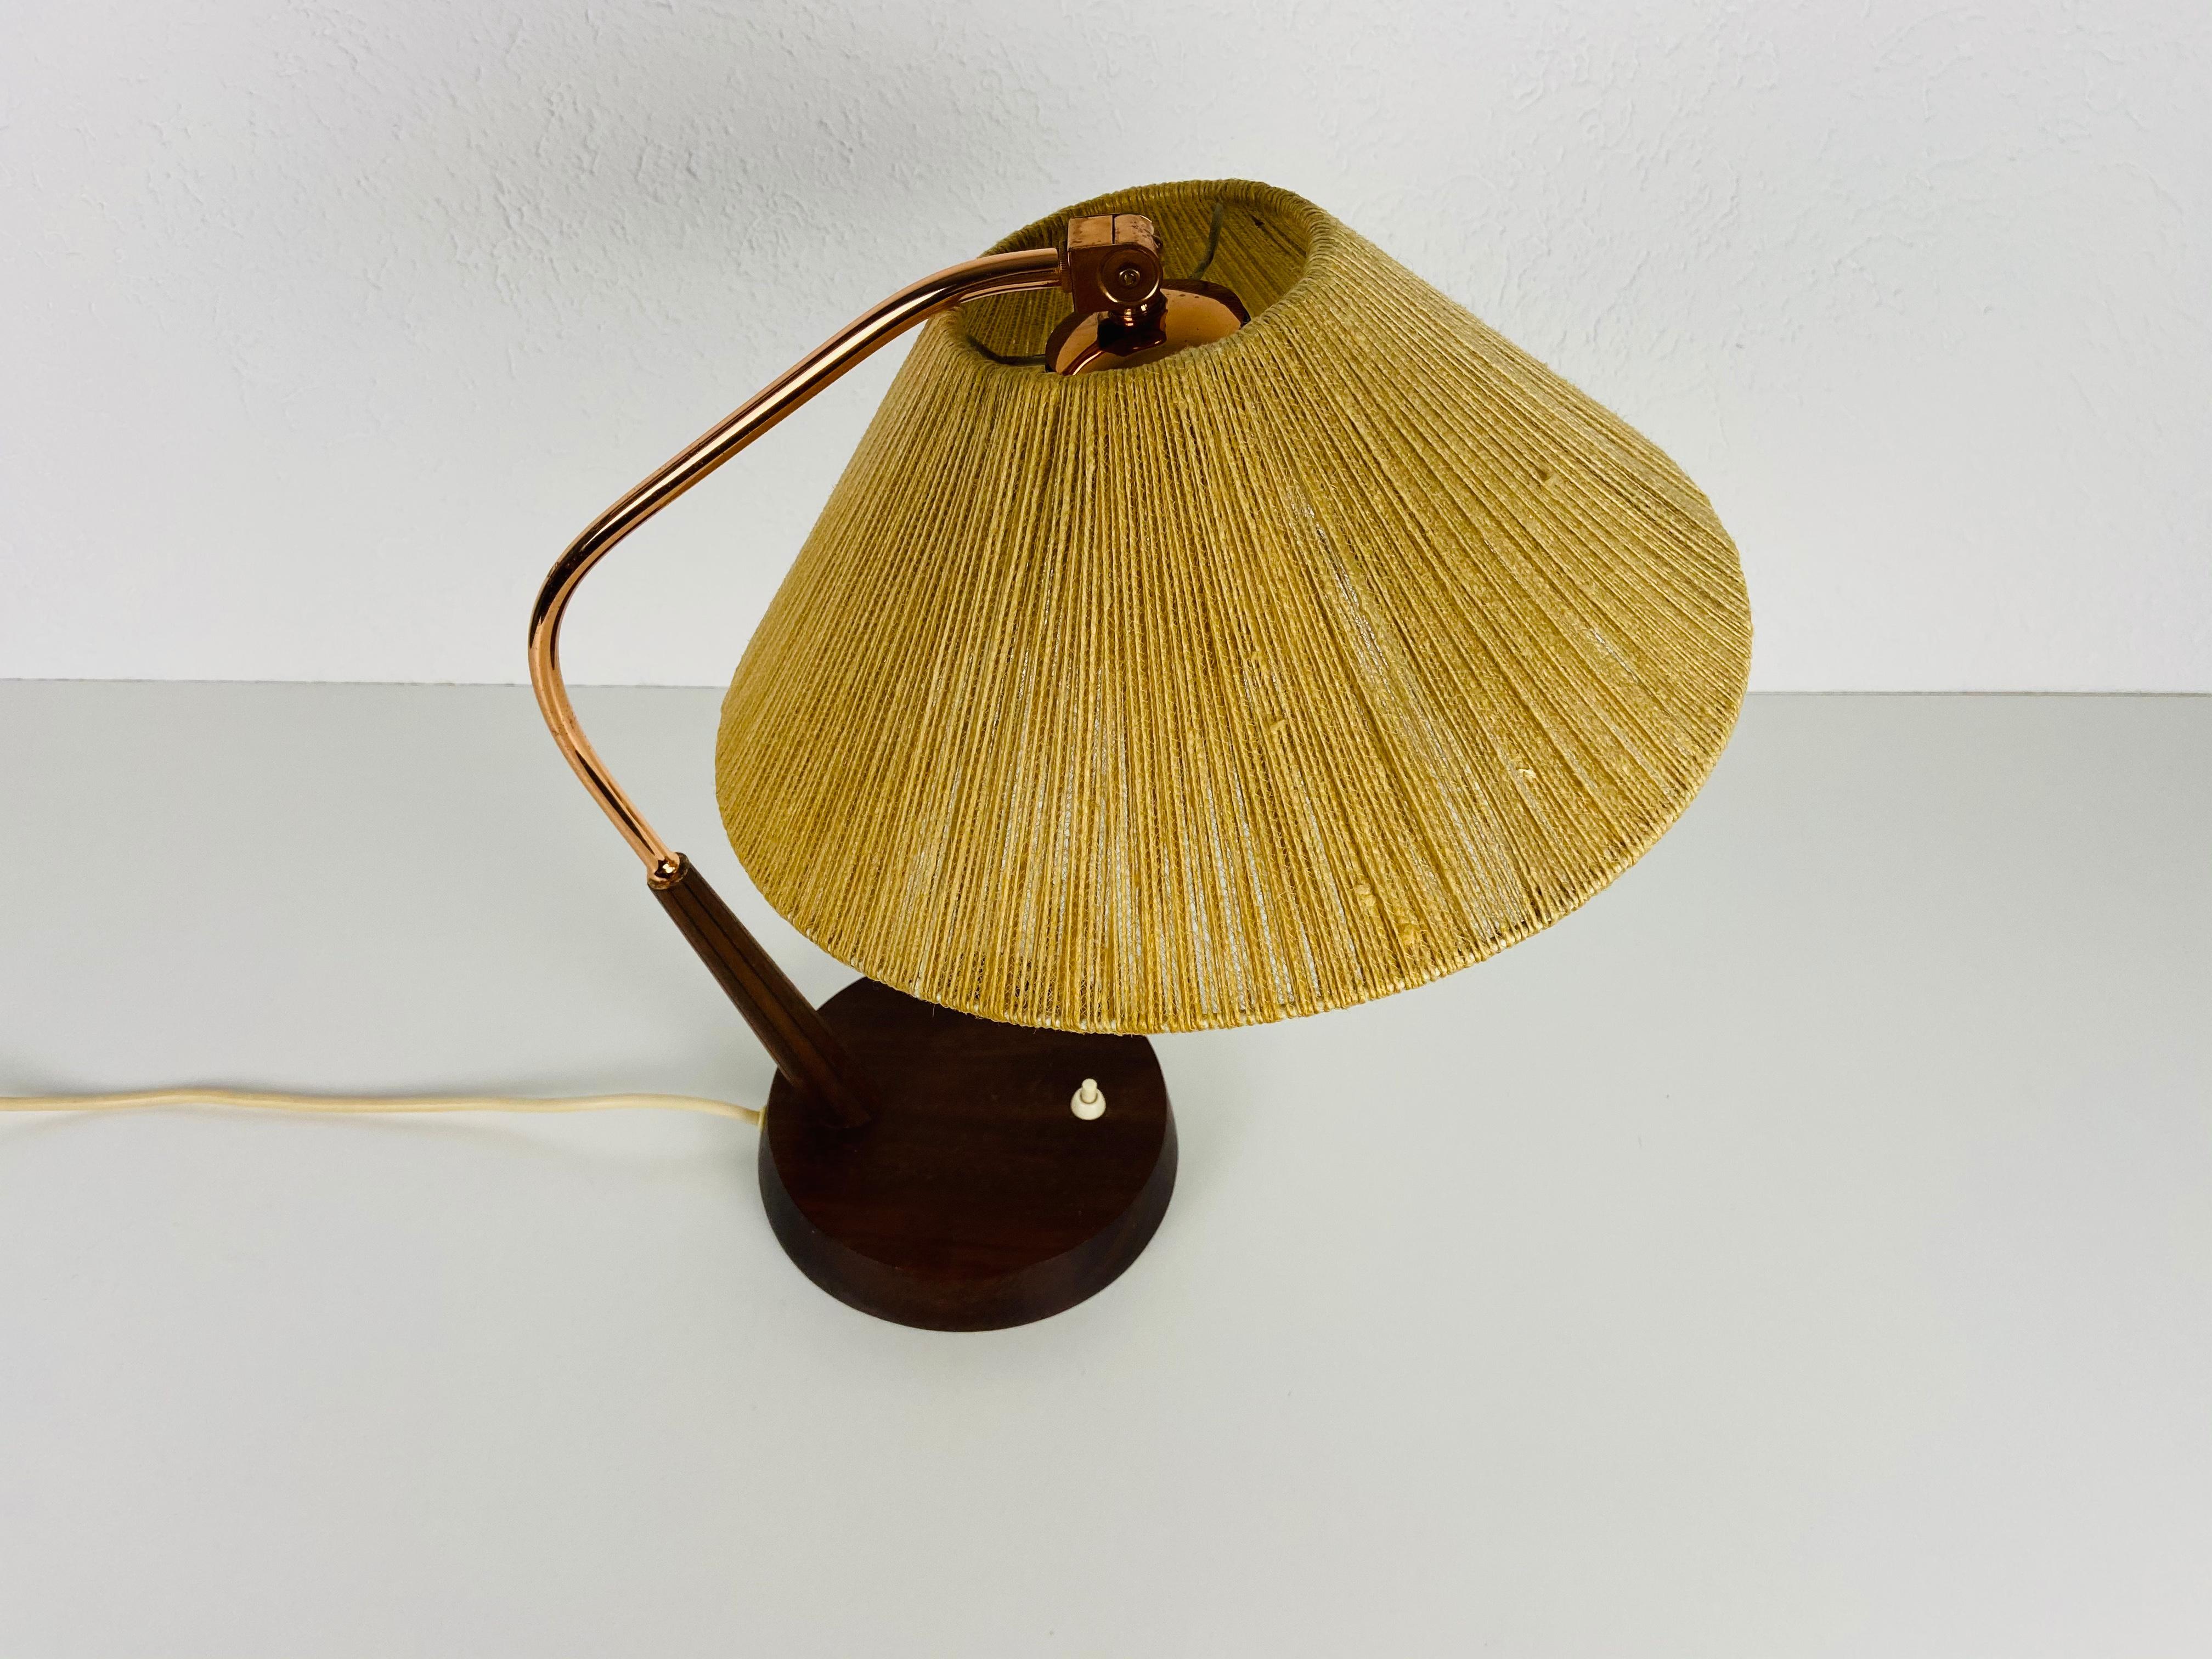 Midcentury Teak and Rattan Table Lamp by Temde, circa 1970 In Good Condition For Sale In Hagenbach, DE